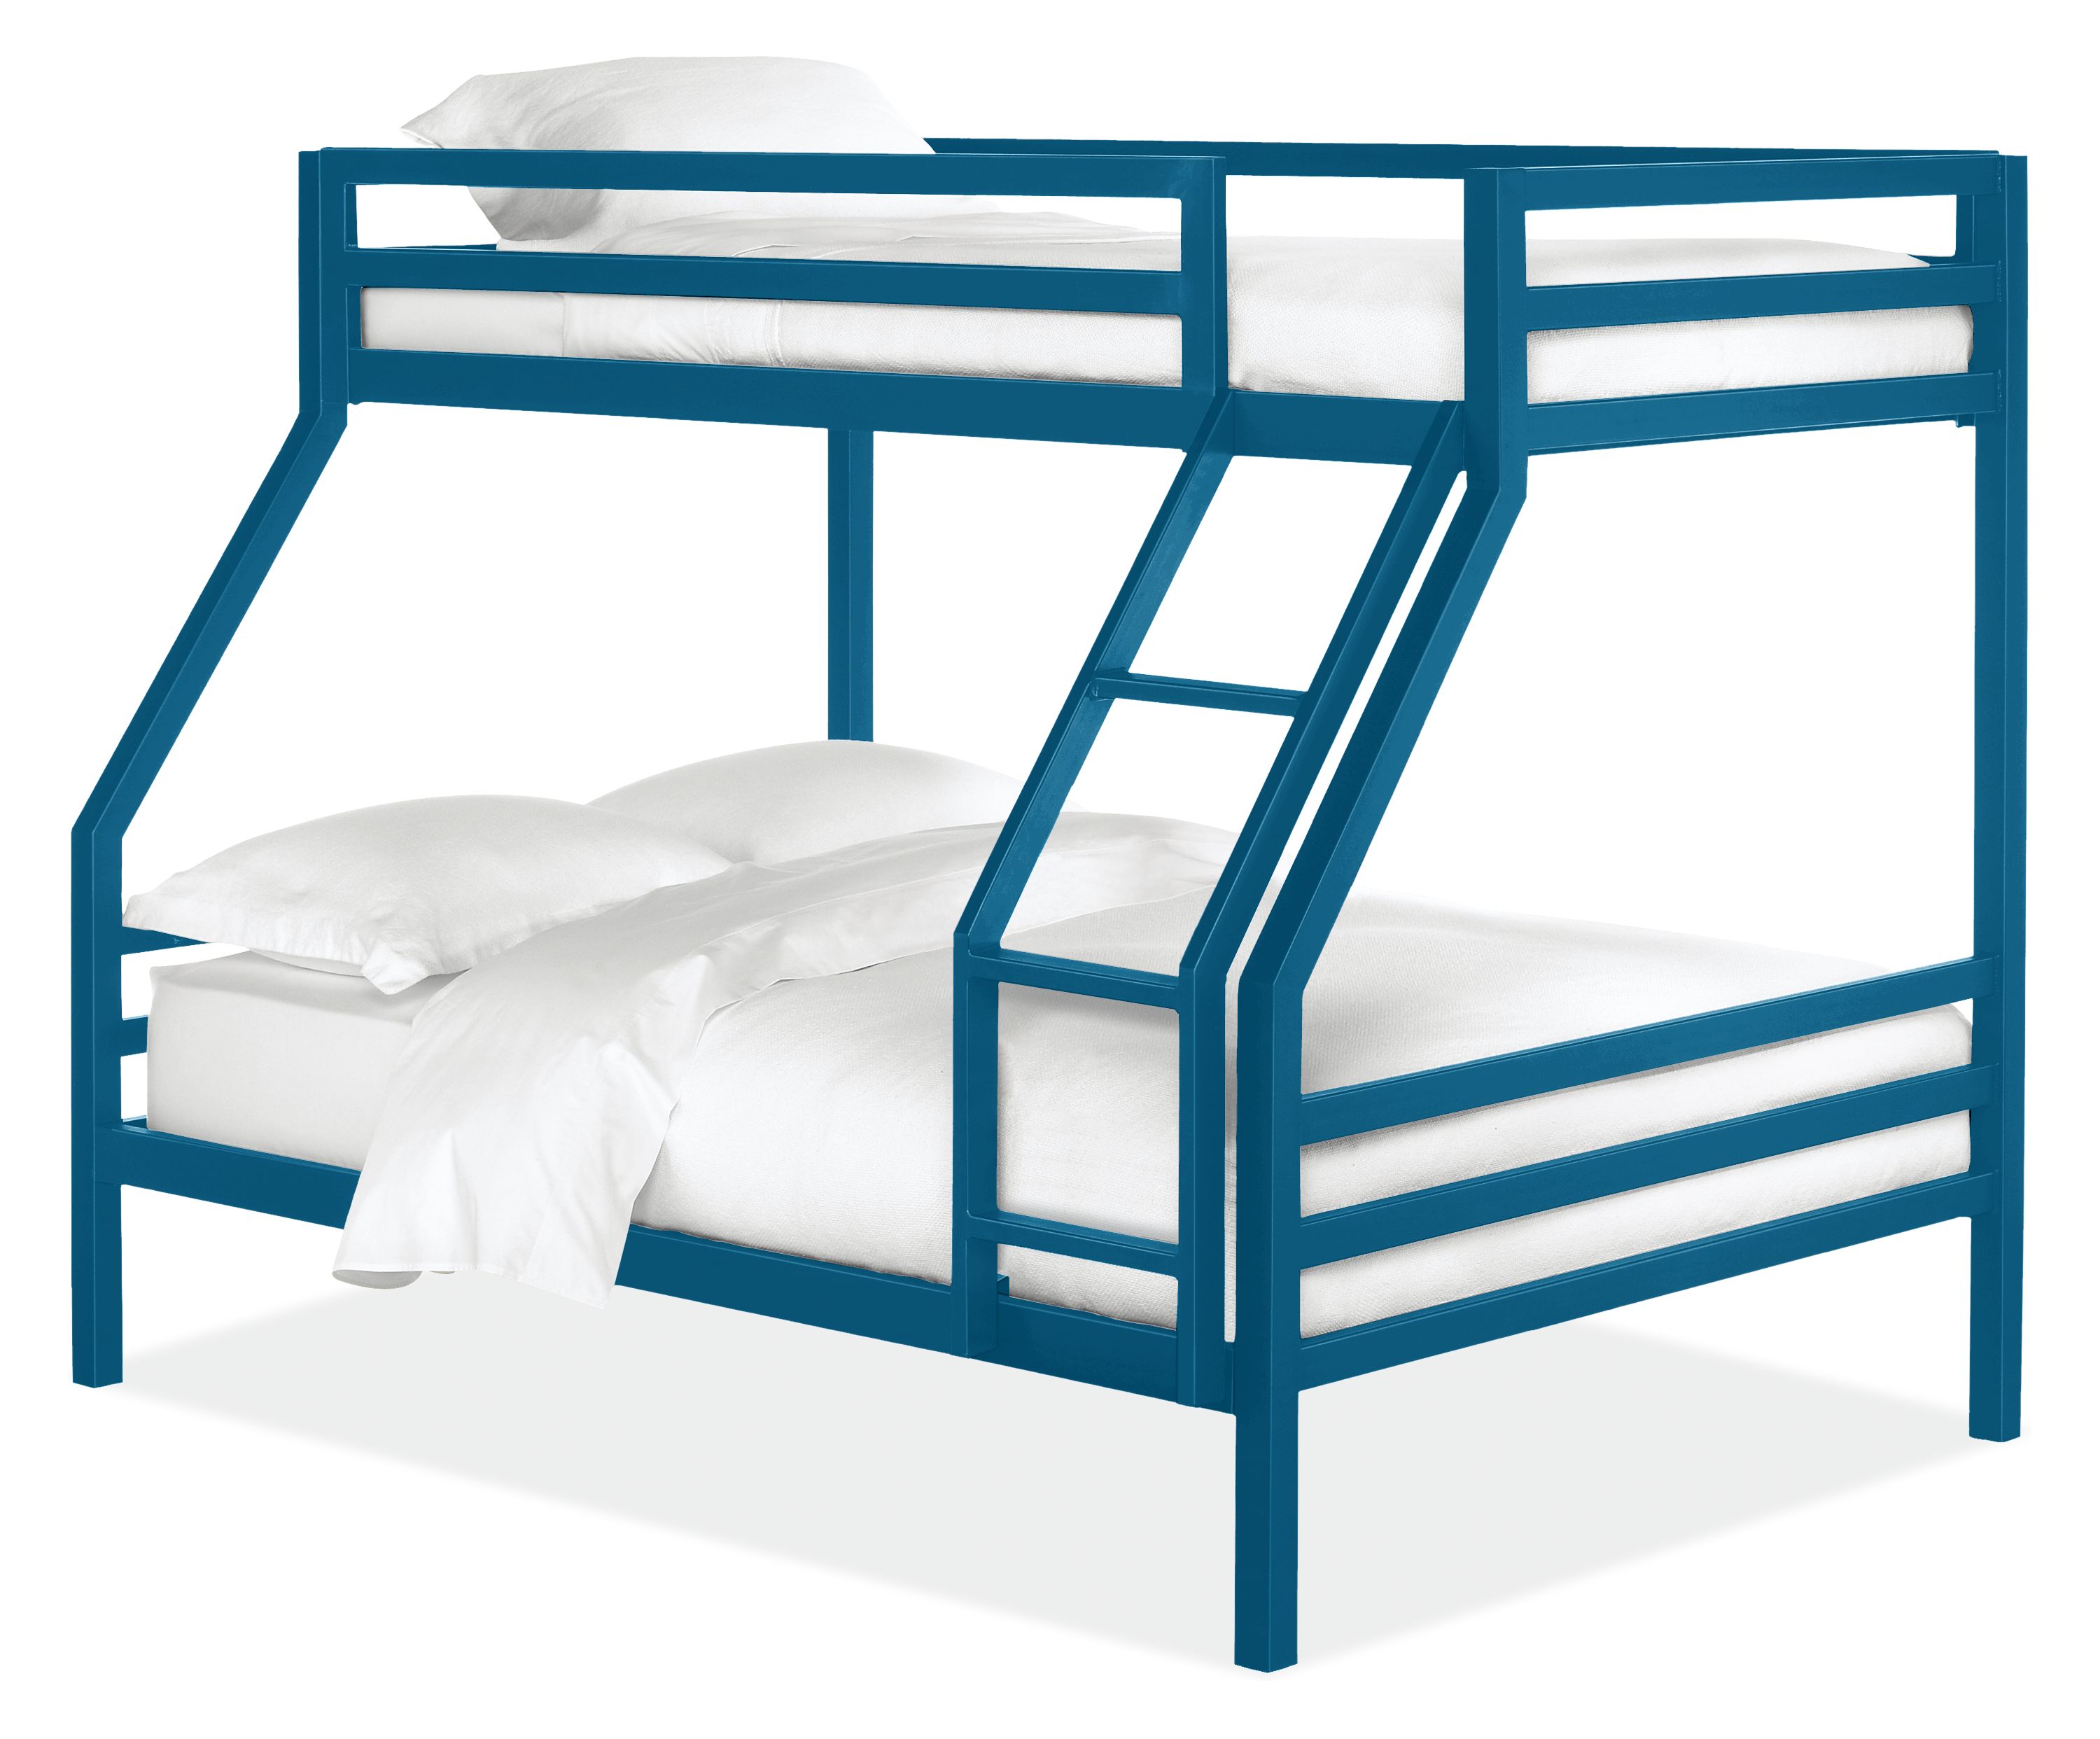 Fort Bunk Beds In Colors Twin Over, Bunk Beds That Can Be Separated